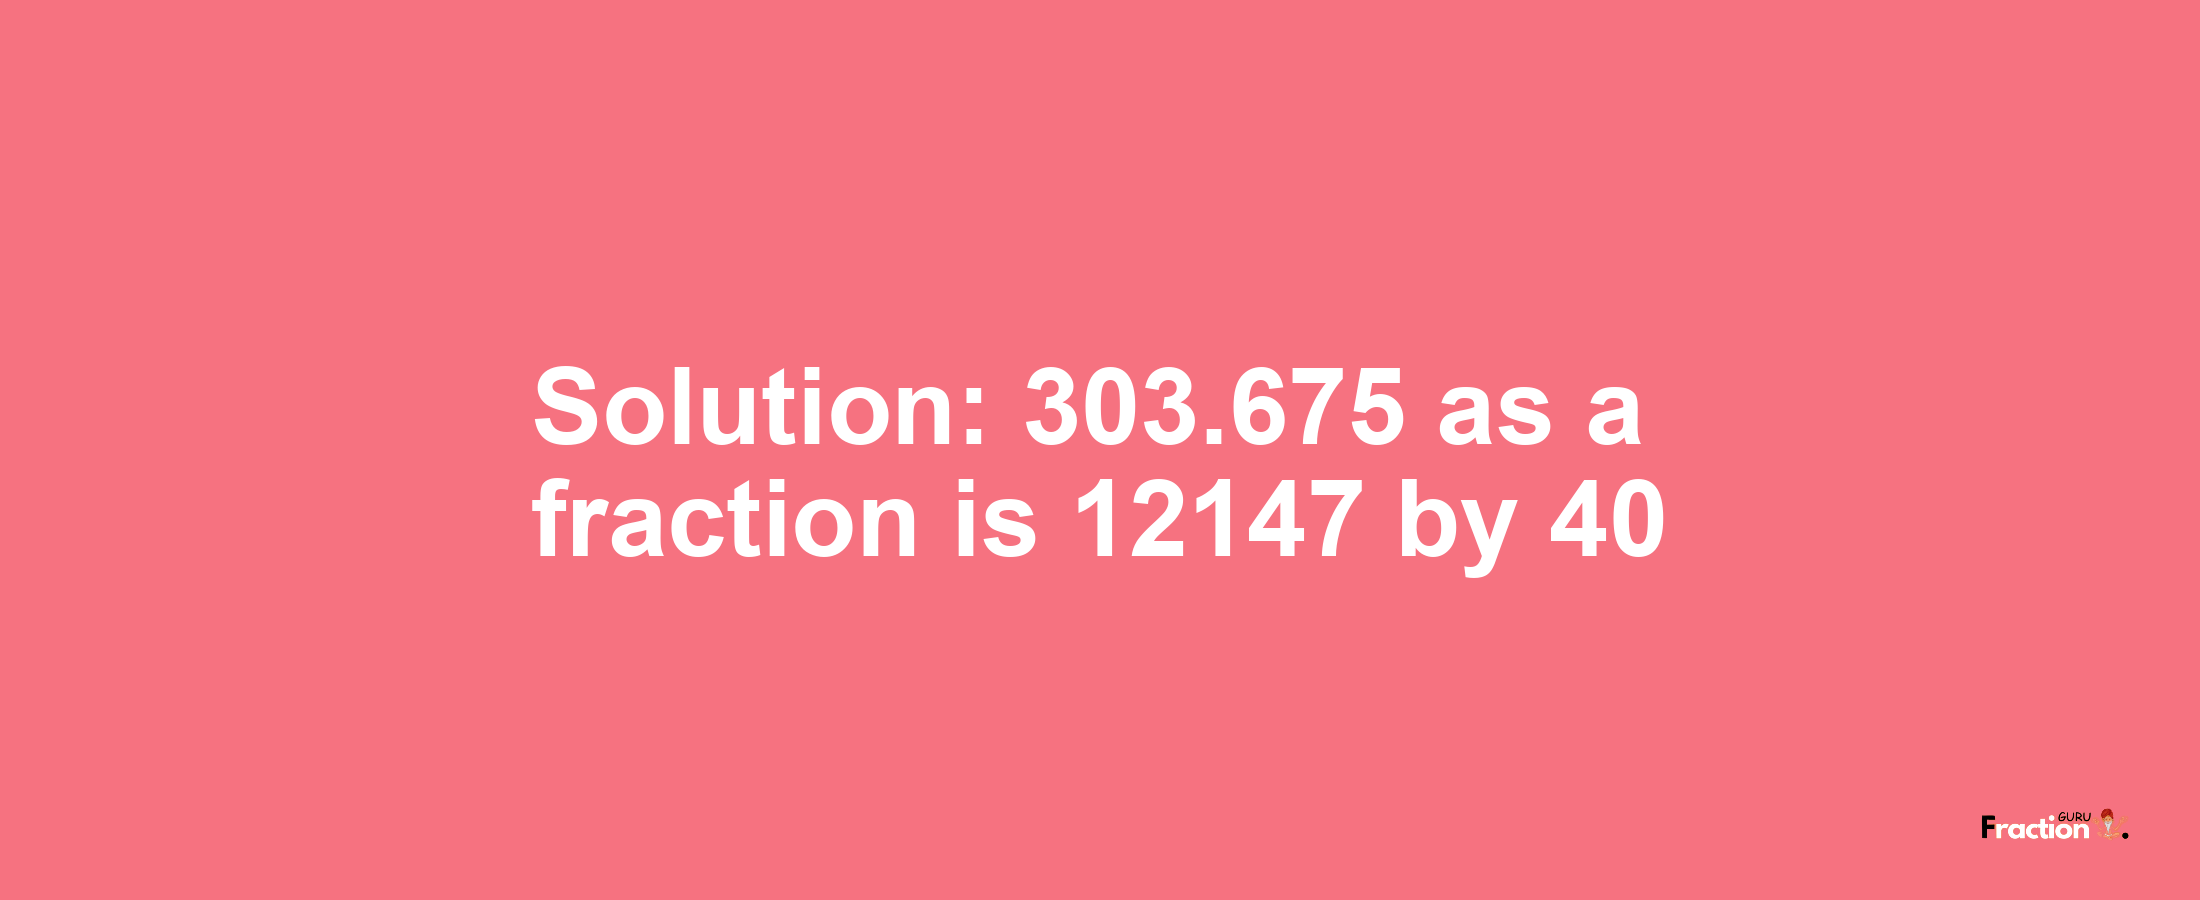 Solution:303.675 as a fraction is 12147/40